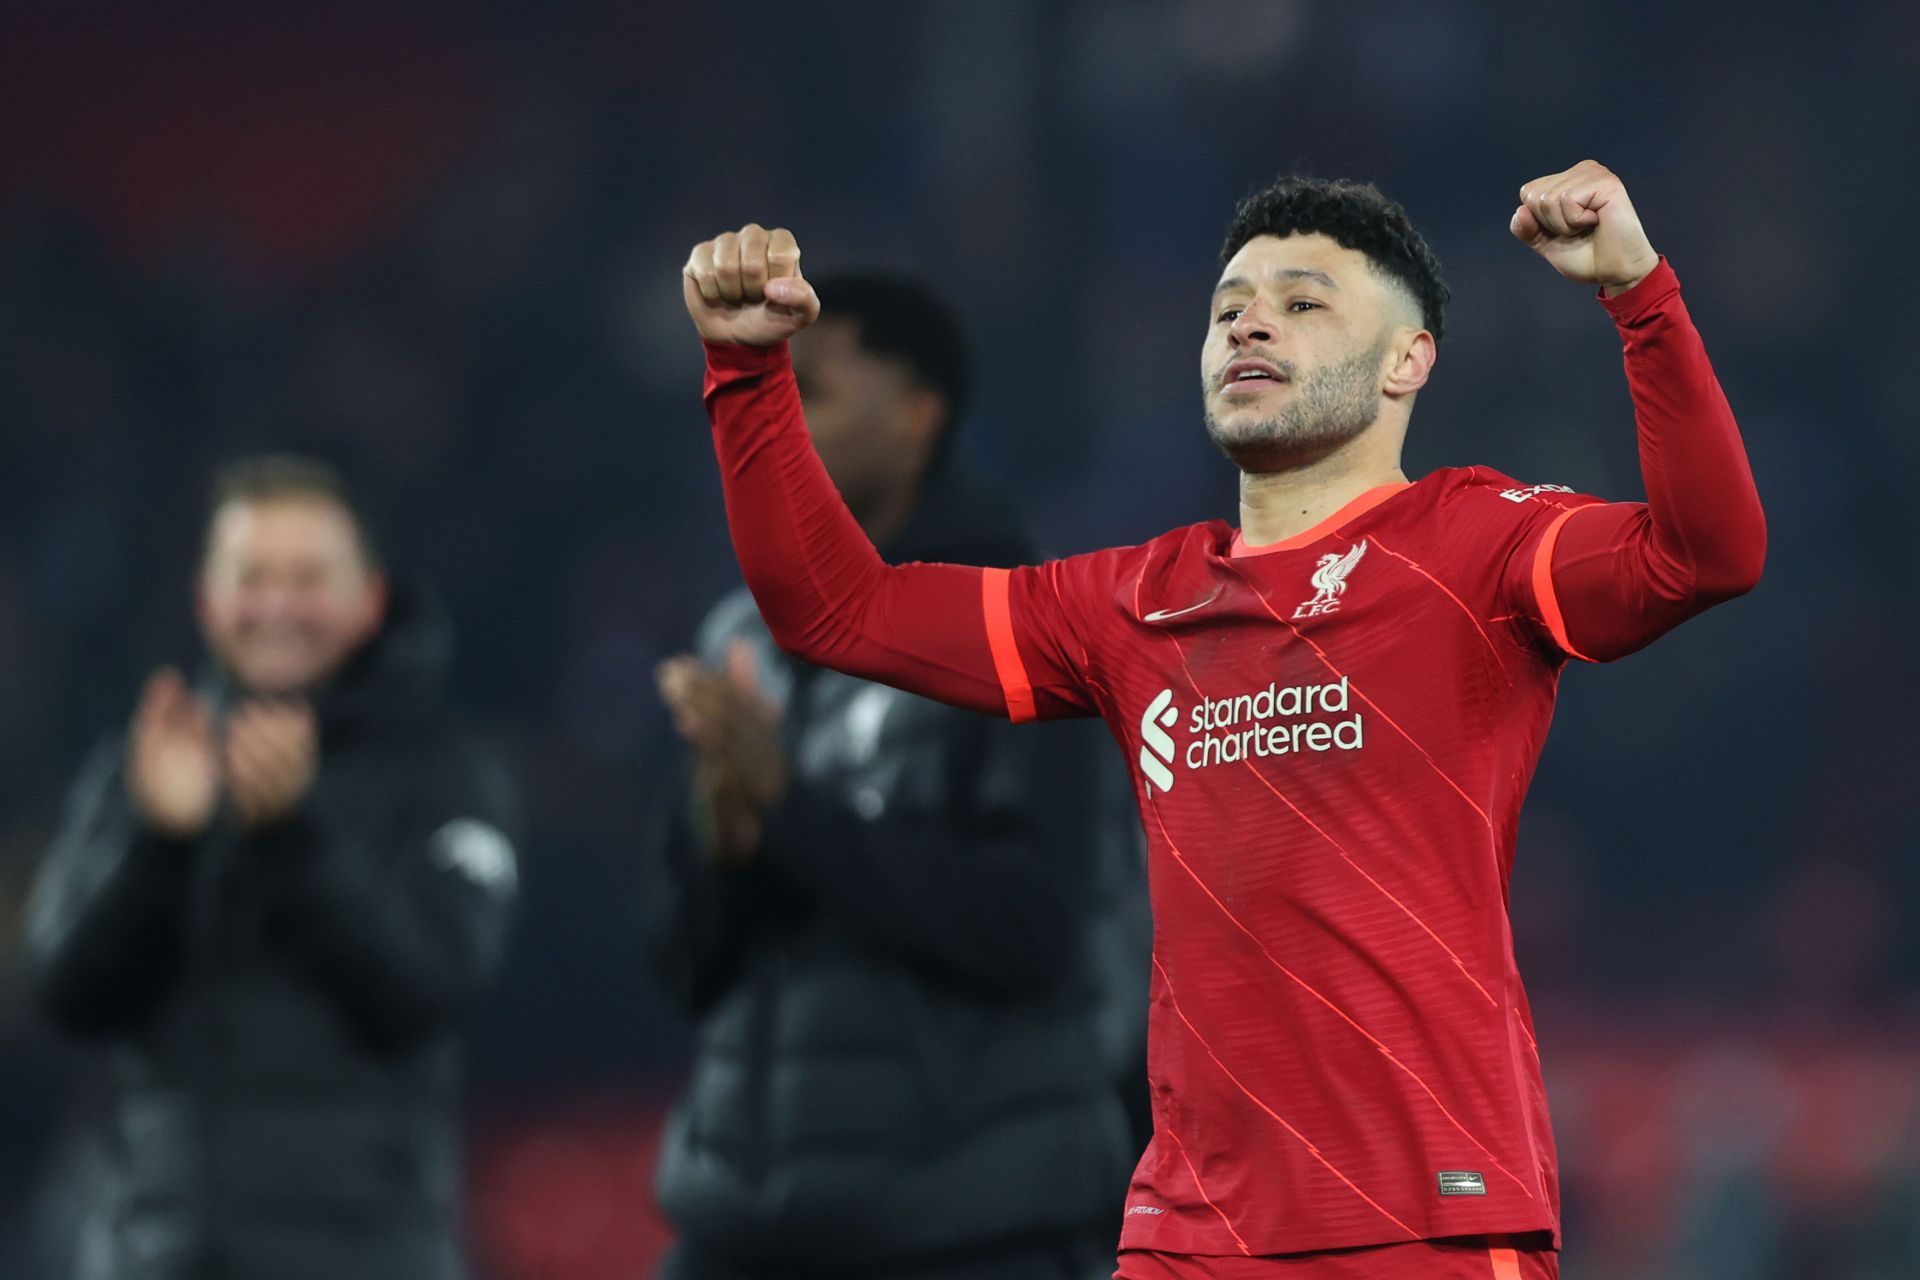 Alex Oxlade-Chamberlain will look to leave Liverpool at the end of the season